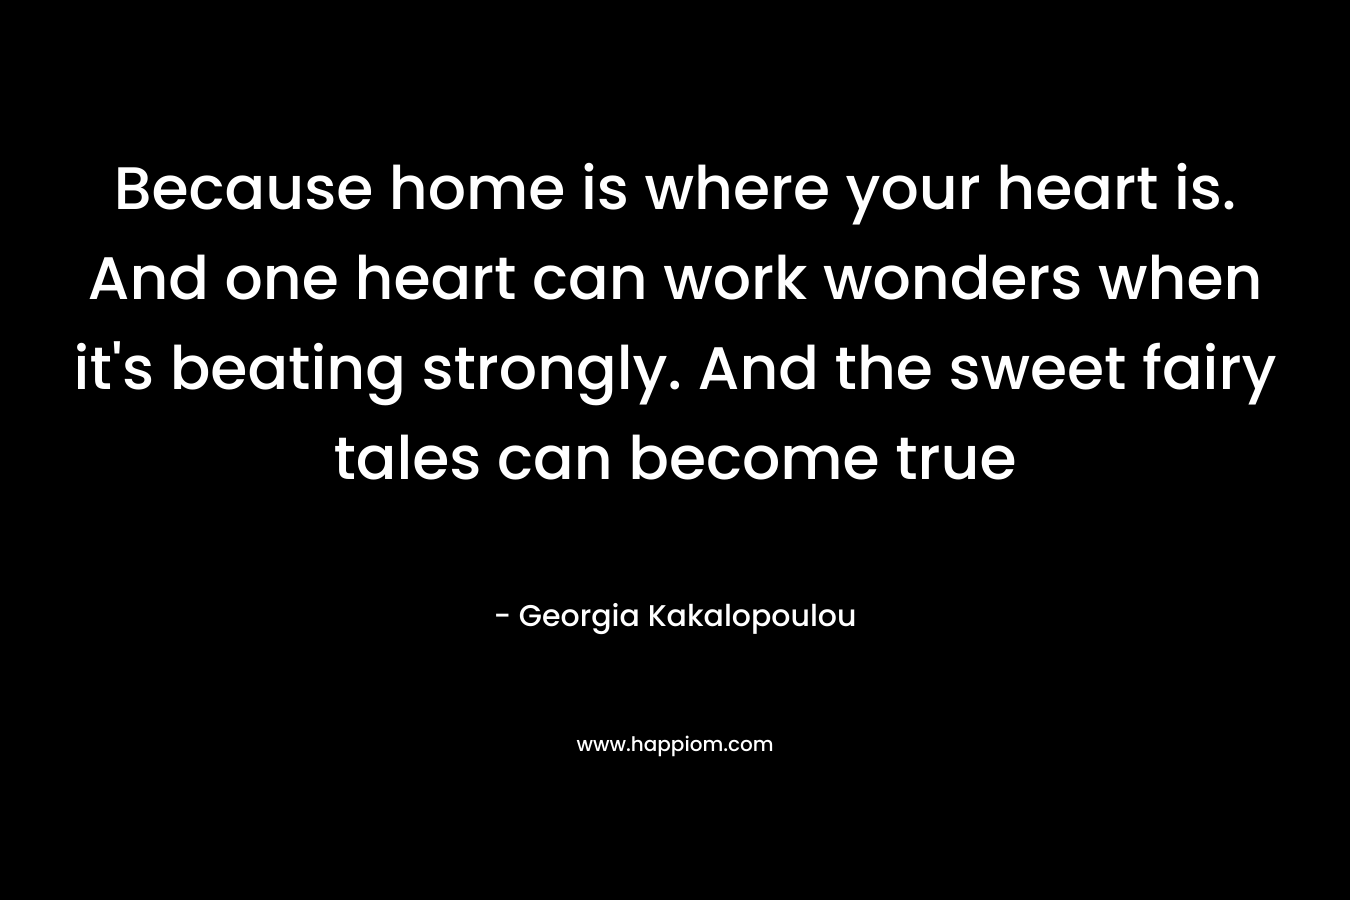 Because home is where your heart is. And one heart can work wonders when it's beating strongly. And the sweet fairy tales can become true